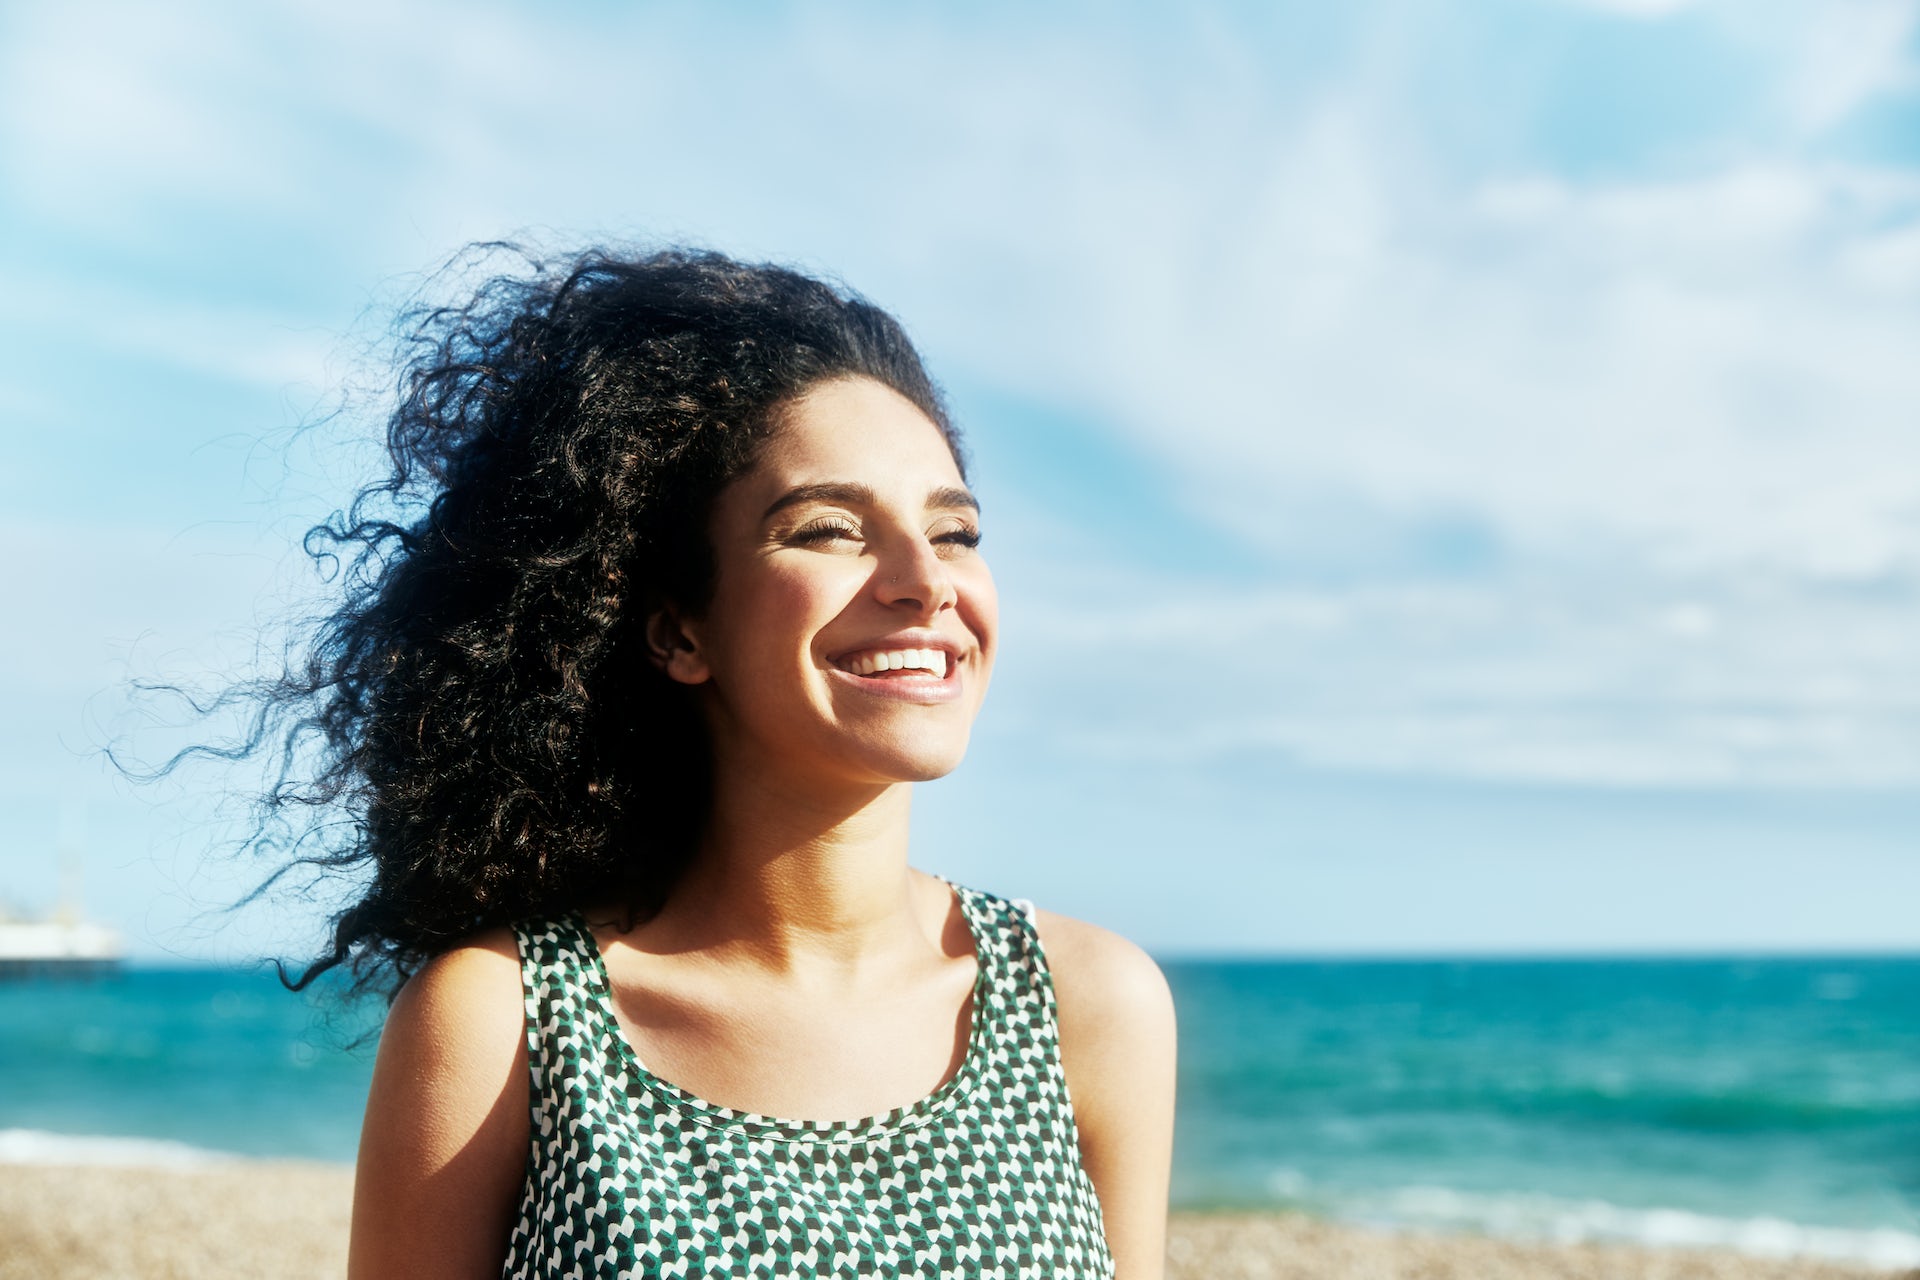 smiling woman standing on a beach, her curly hair blowing in the wind